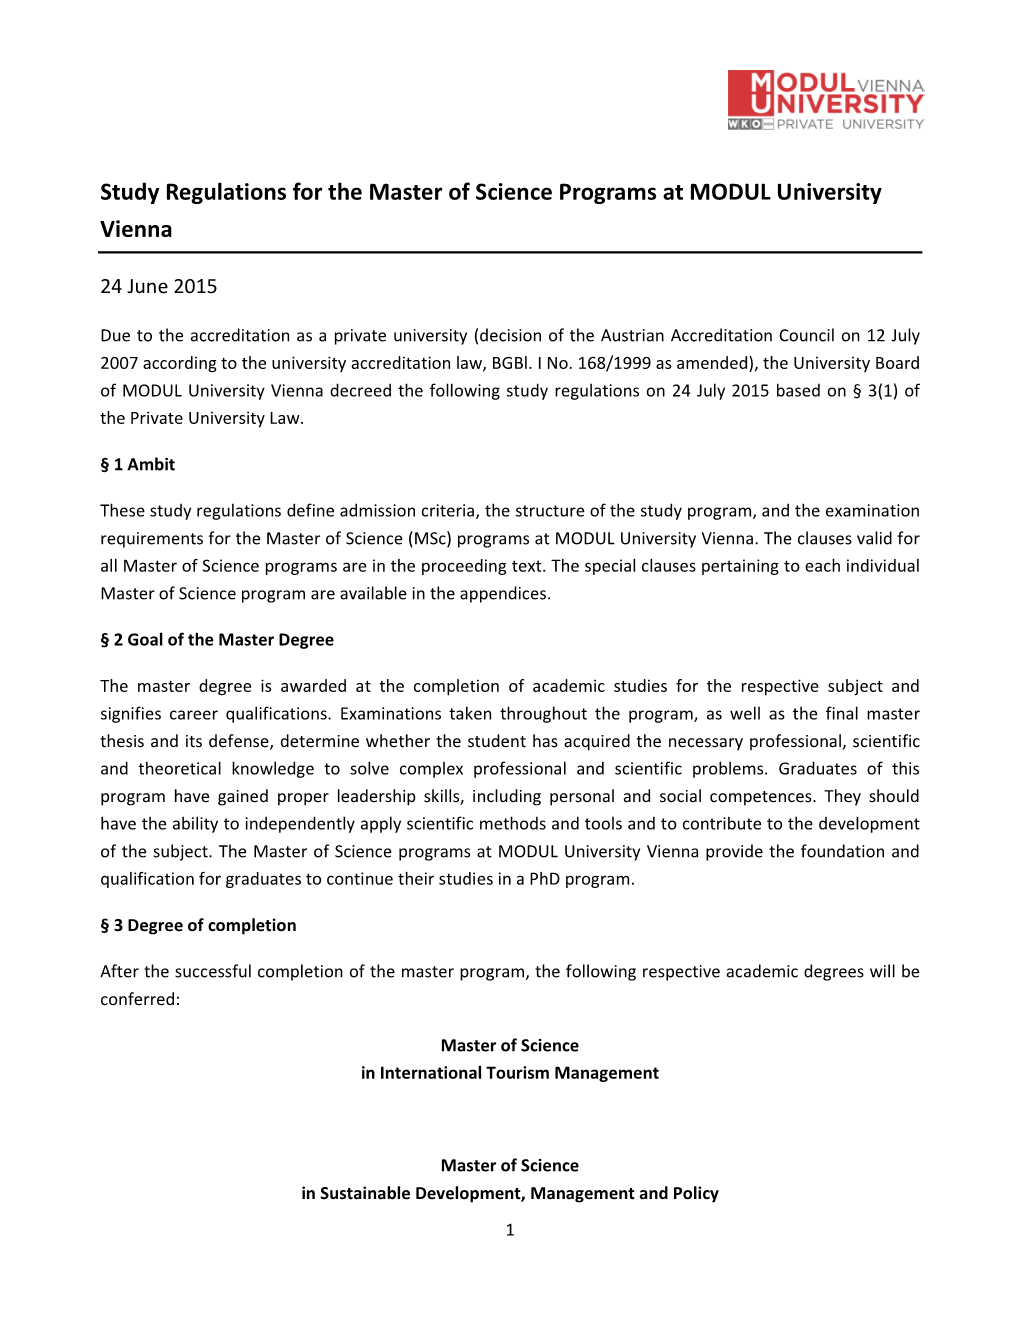 Study Regulations for the Master of Science Programs at MODUL University Vienna